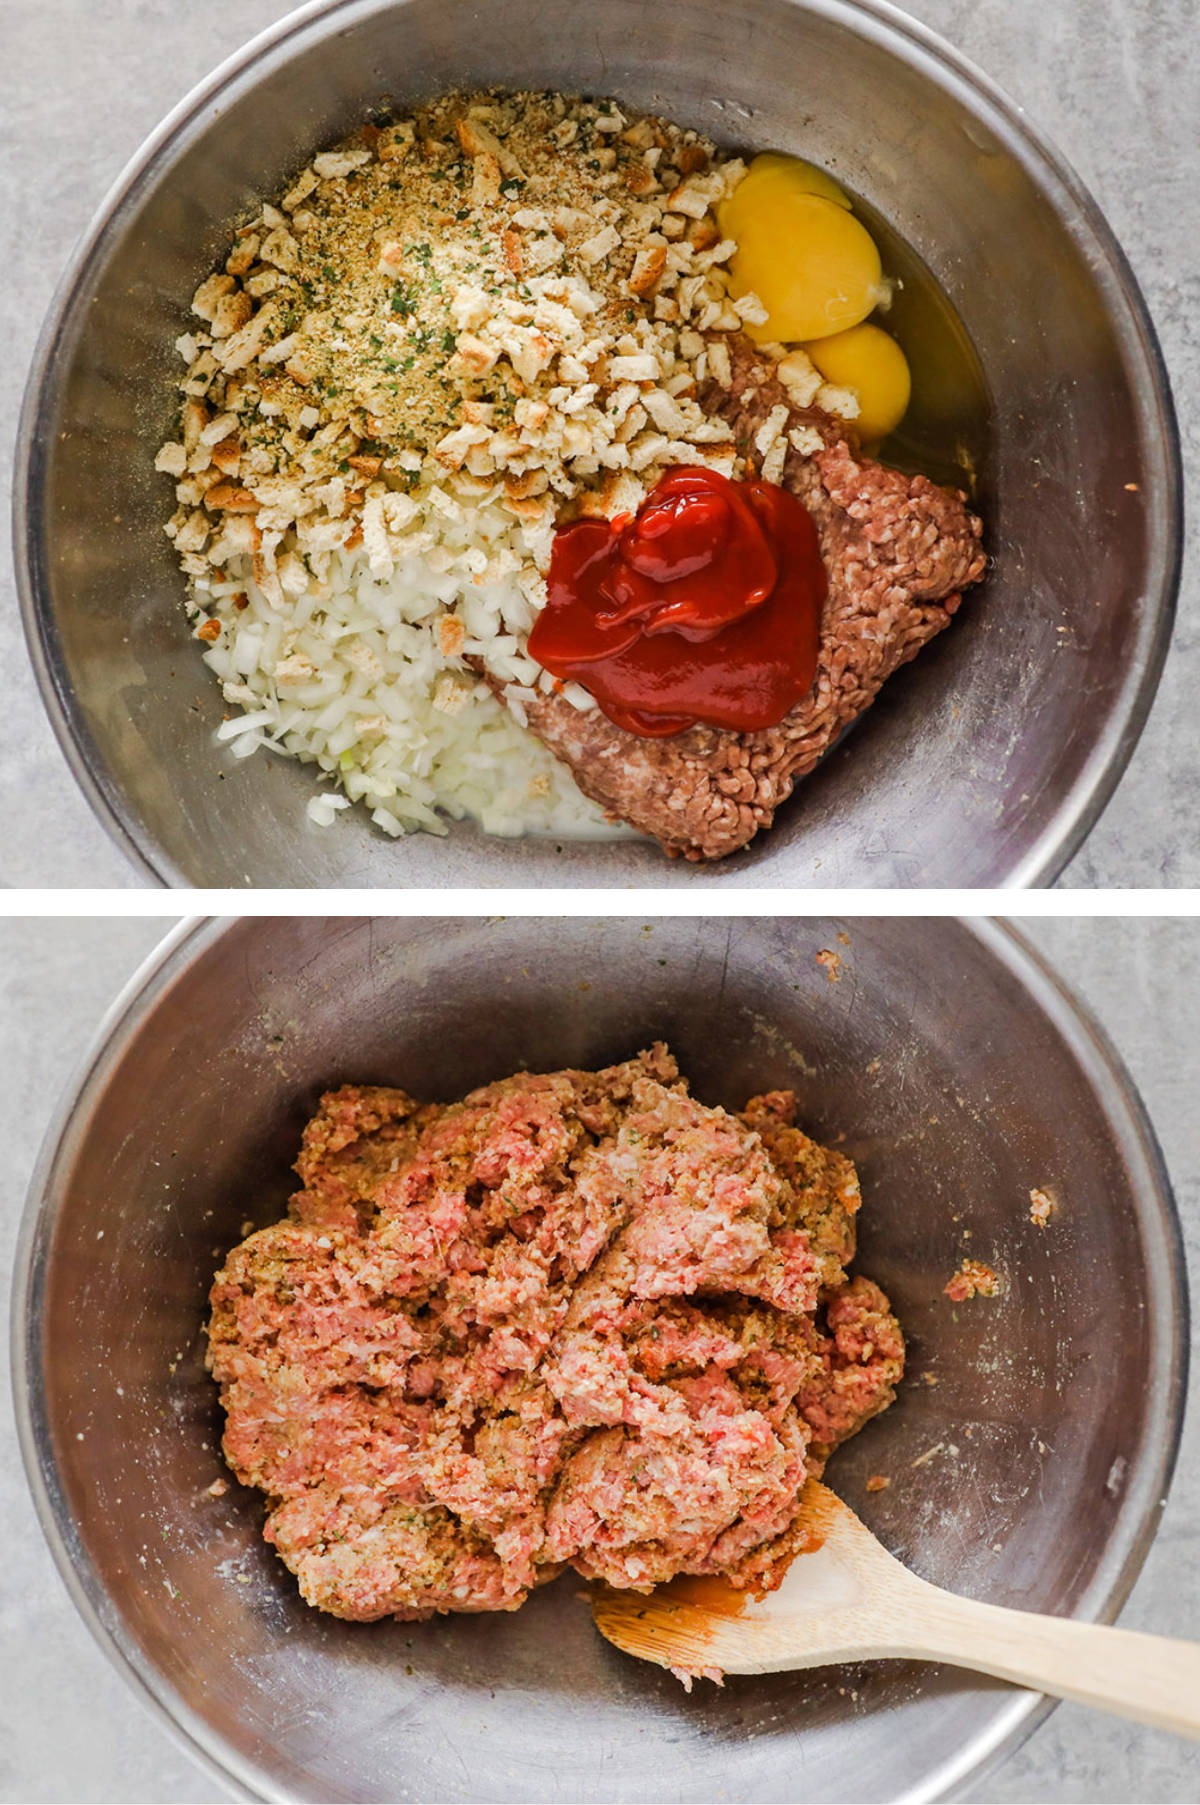 Two overhead images in one: 1. All the ingredients added to a steel bowl. 2. All the ingredients mixed.